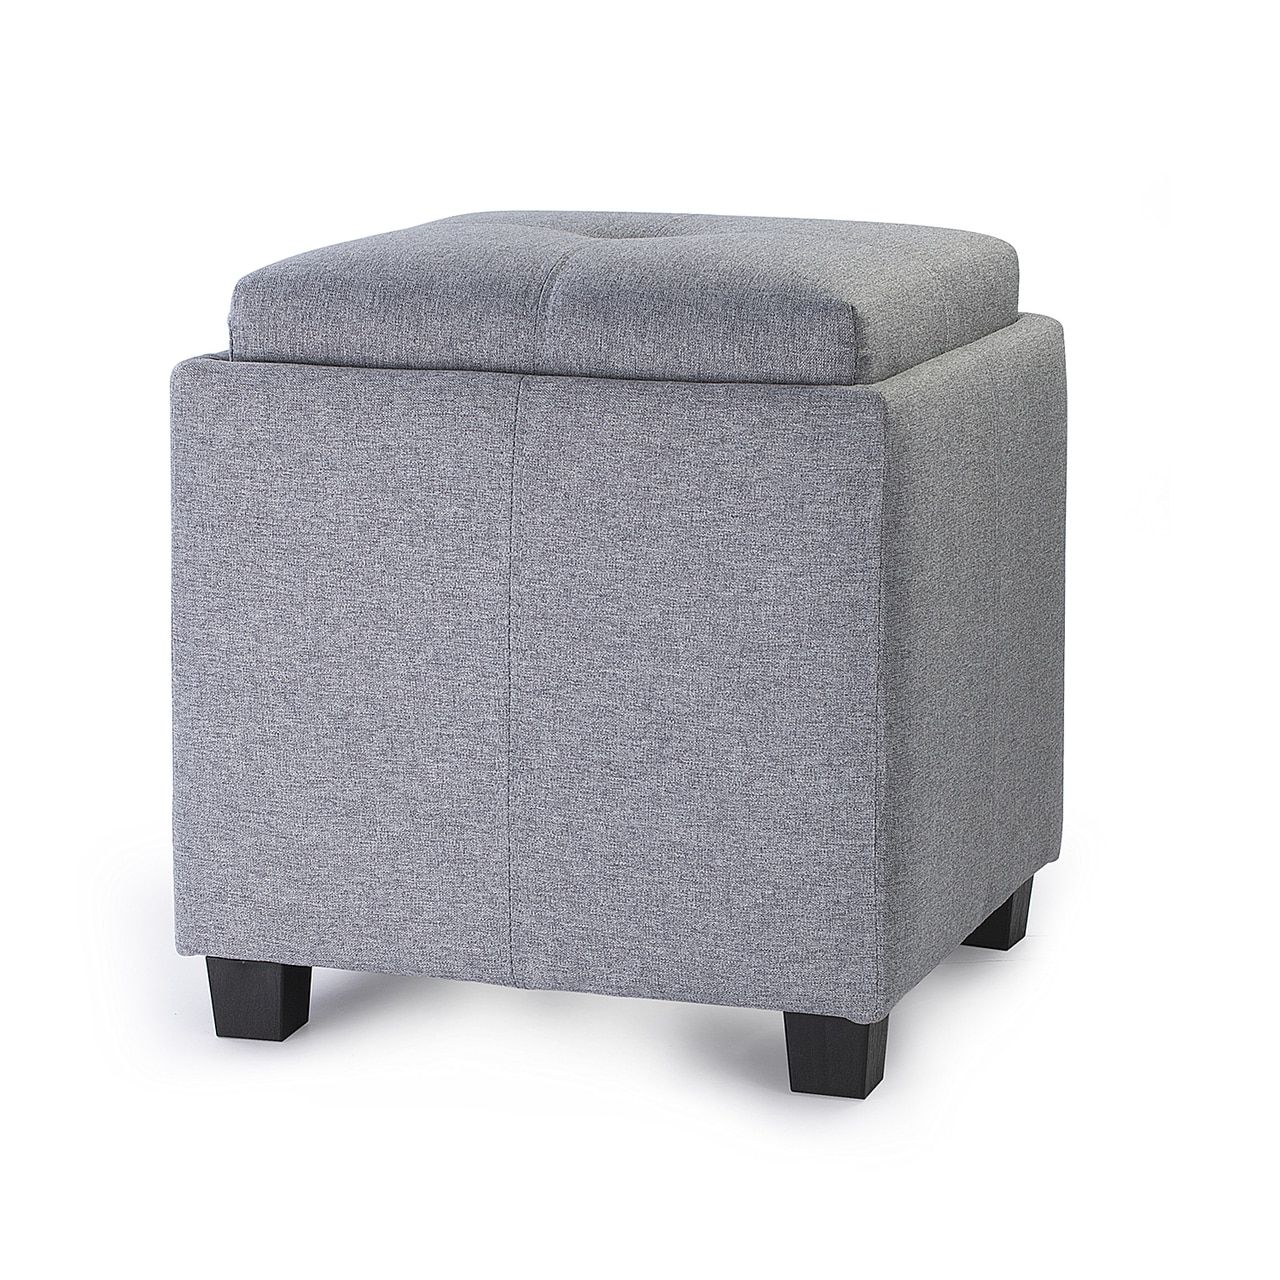 White Wool Square Pouf Ottomans Pertaining To Recent Enova Home Victoria 18 Inches Modern Linen Fabric Square Storage (View 9 of 10)